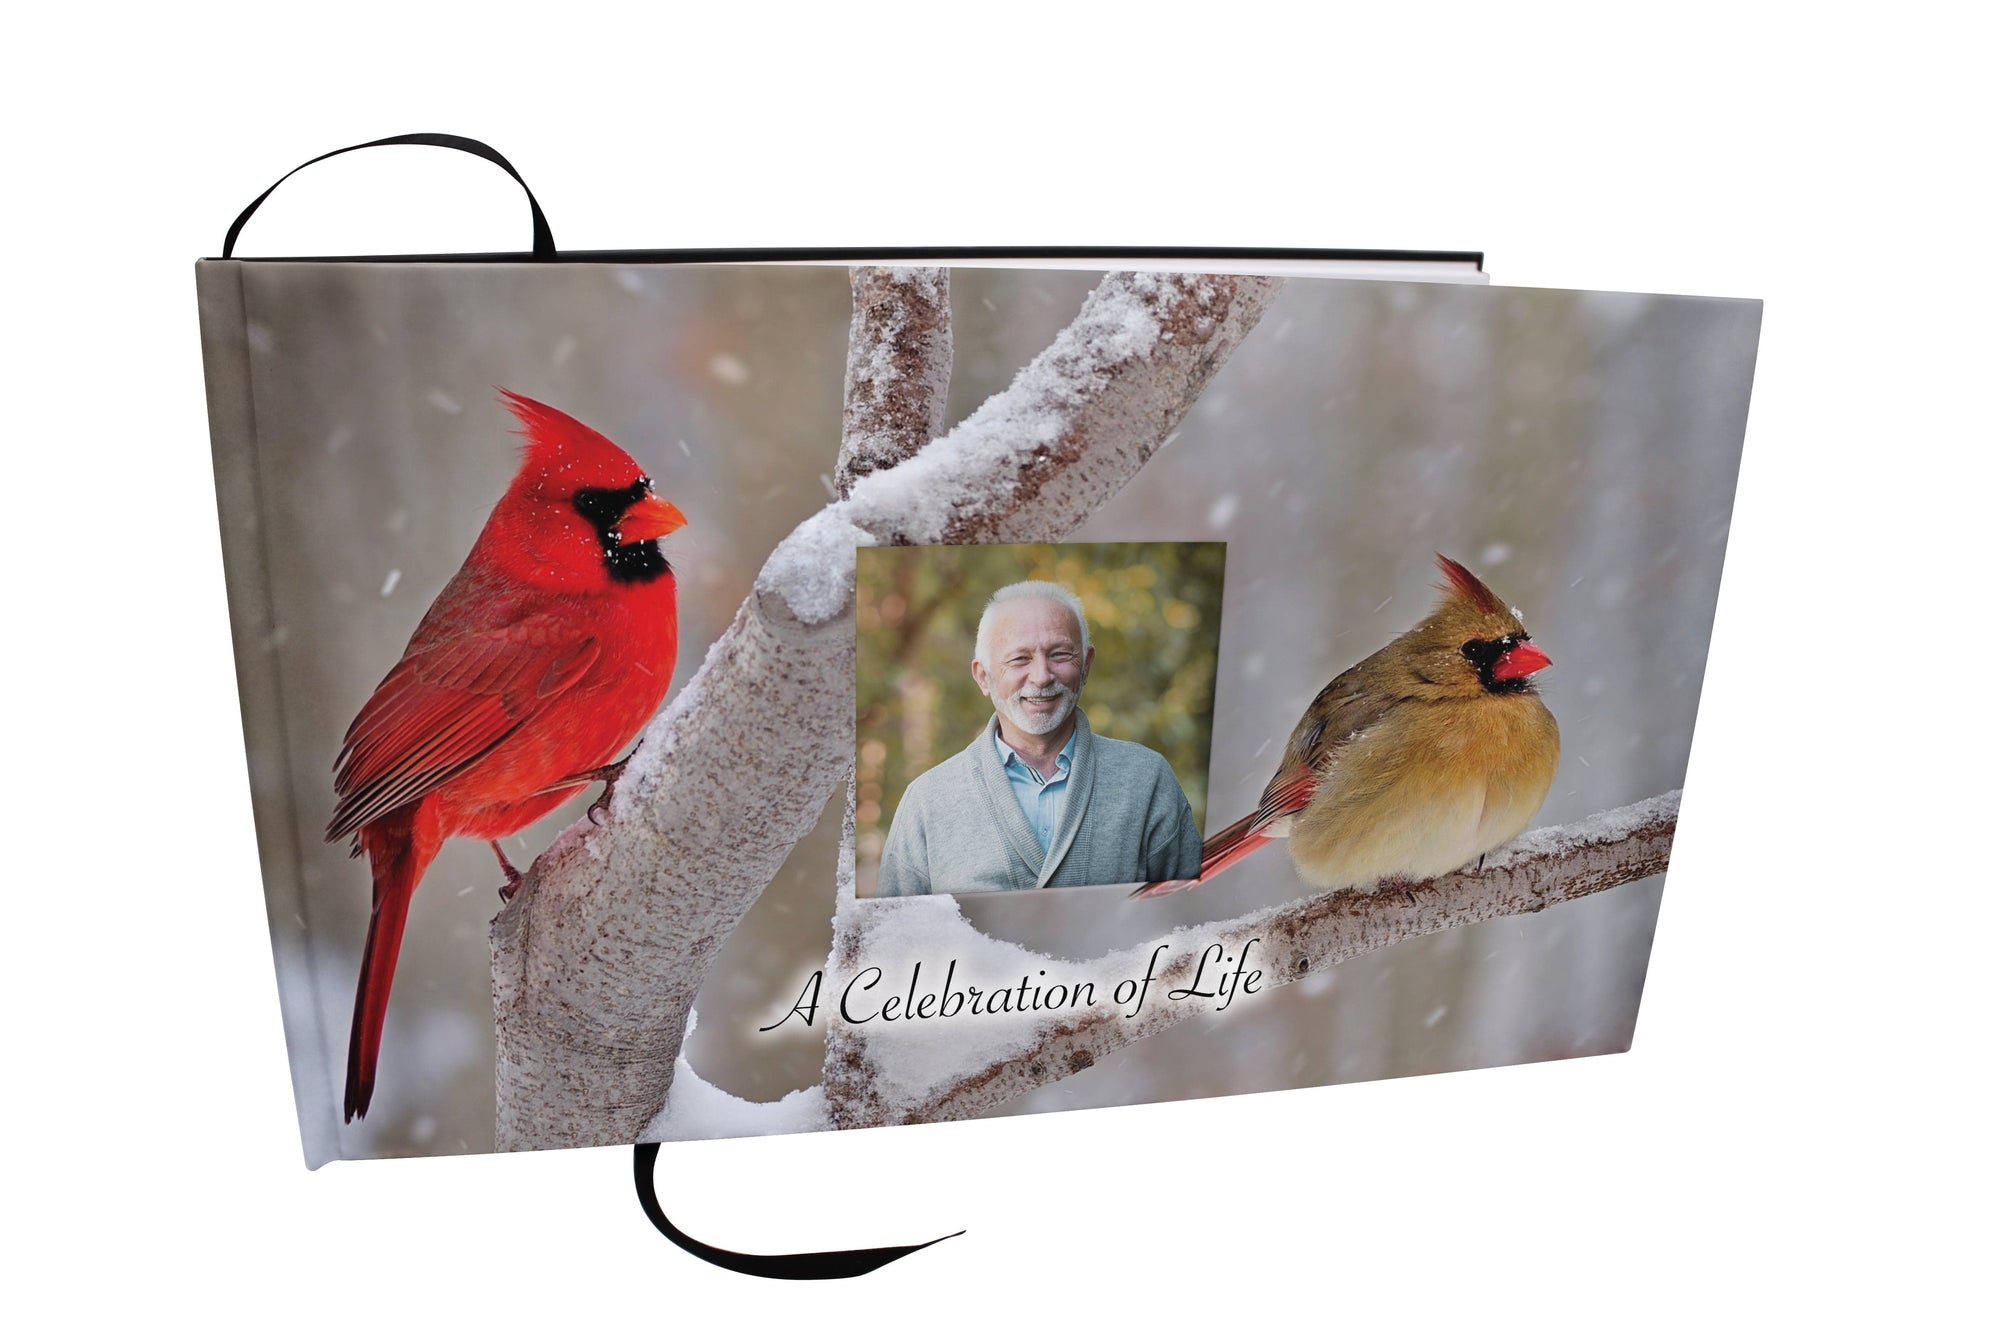 Commemorative Cremation Urns Cozy Cardinals Matching Themed 'Celebration of Life' Guest Book for Funeral or Memorial Service